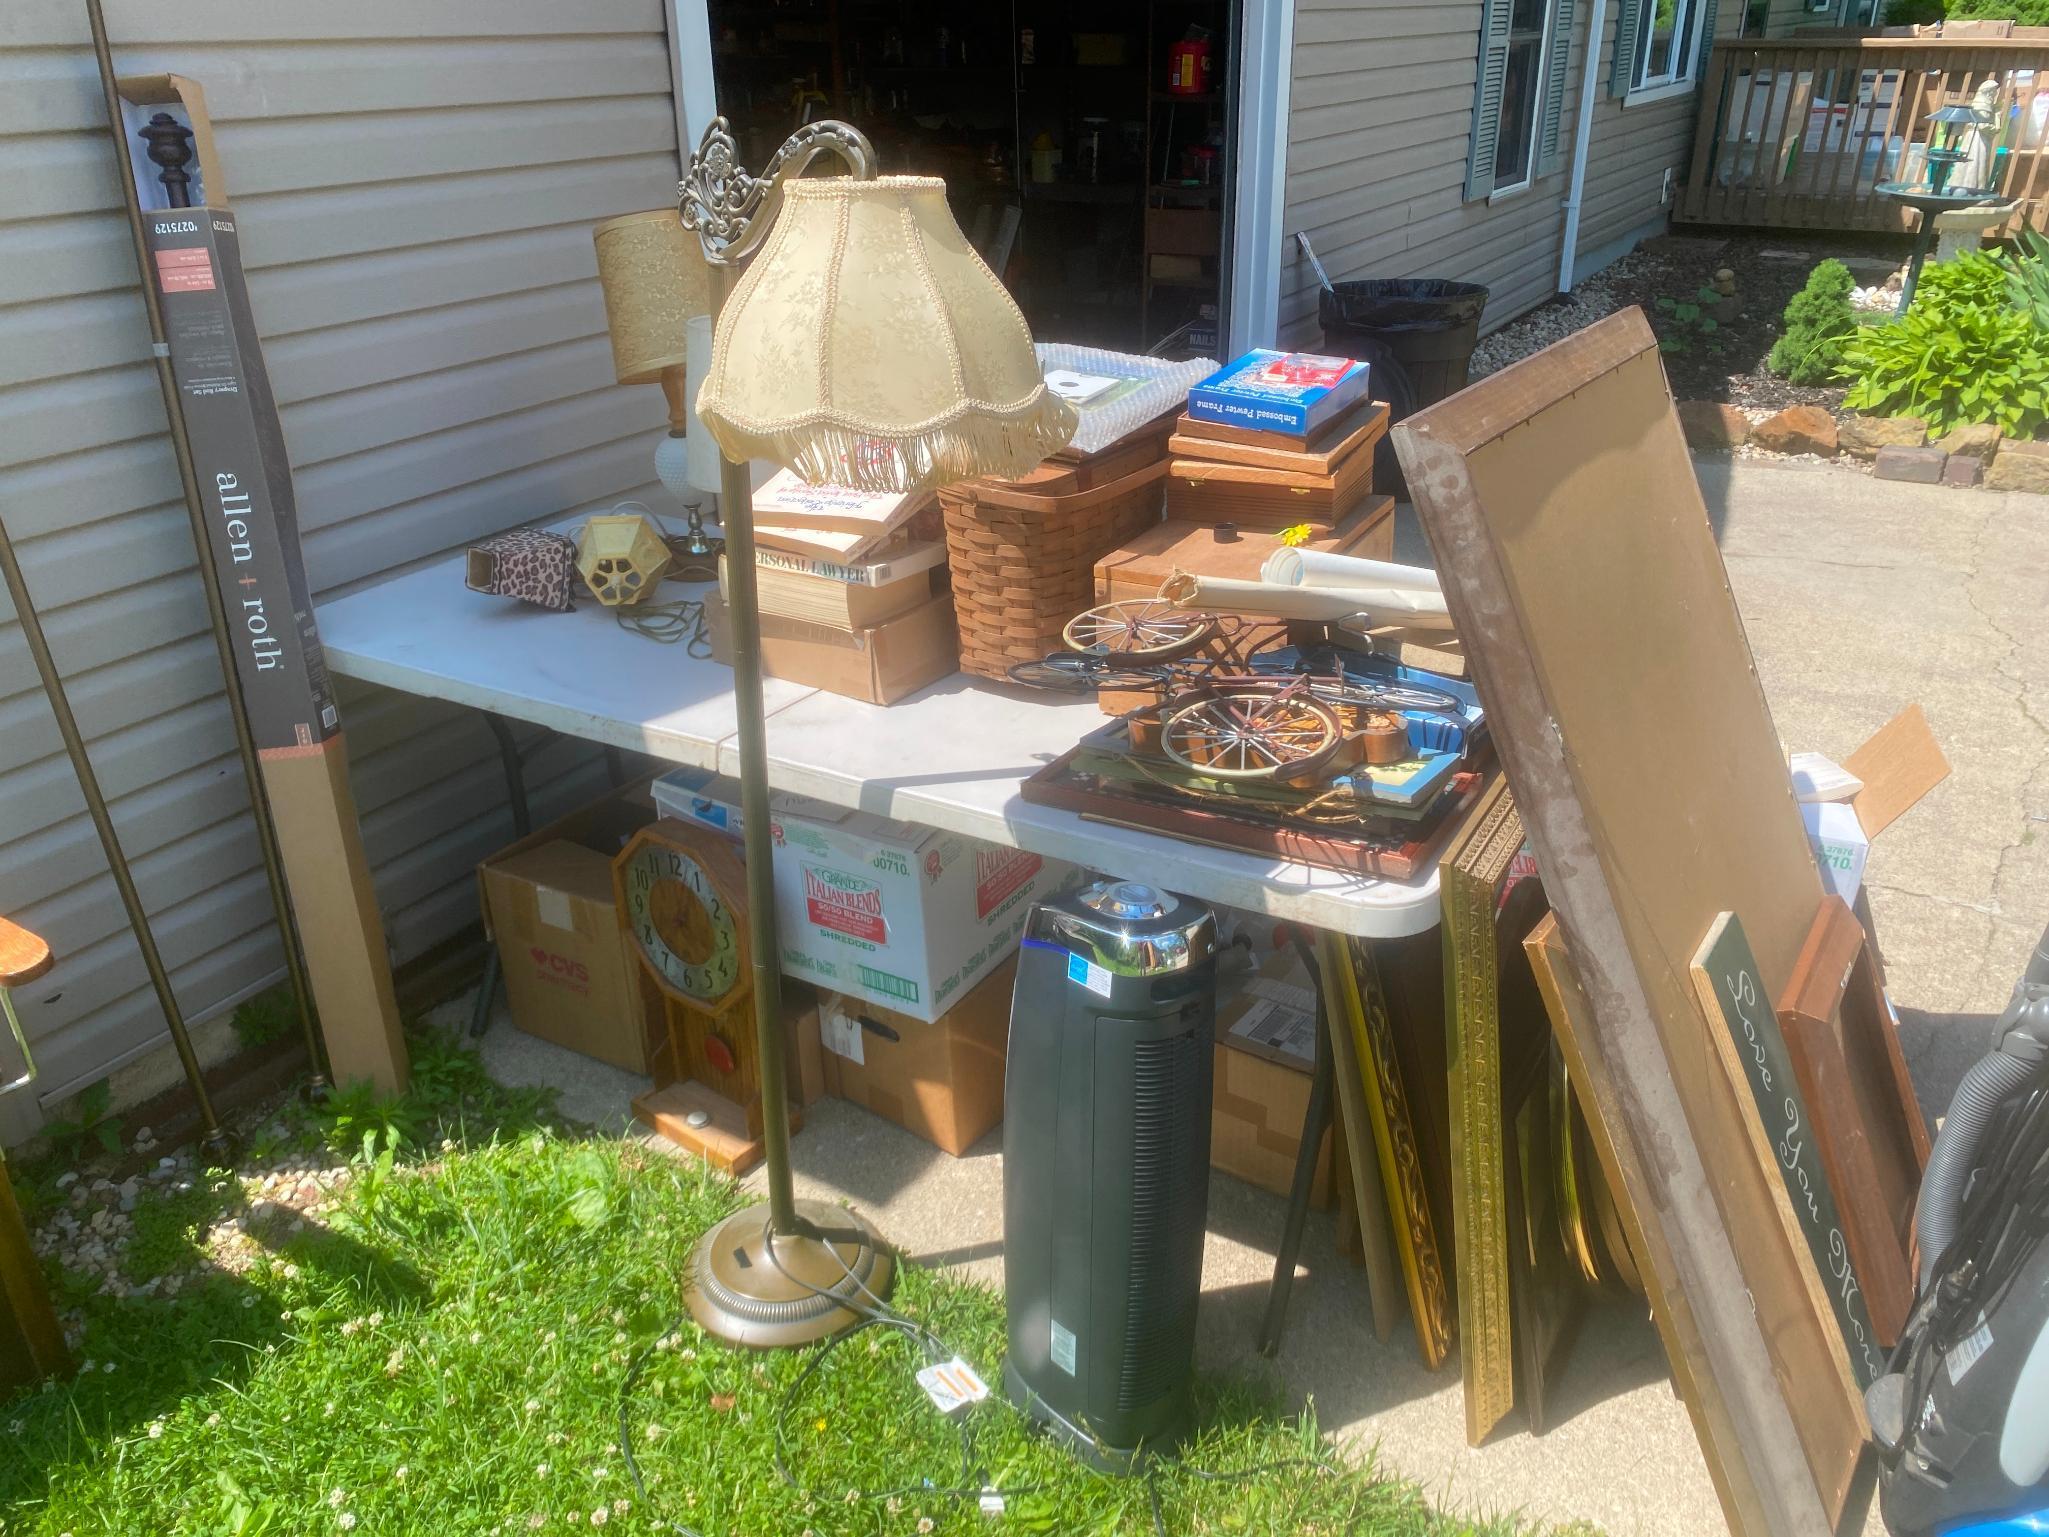 Total Shed Contents - Toys, Art, Vintage and Much More